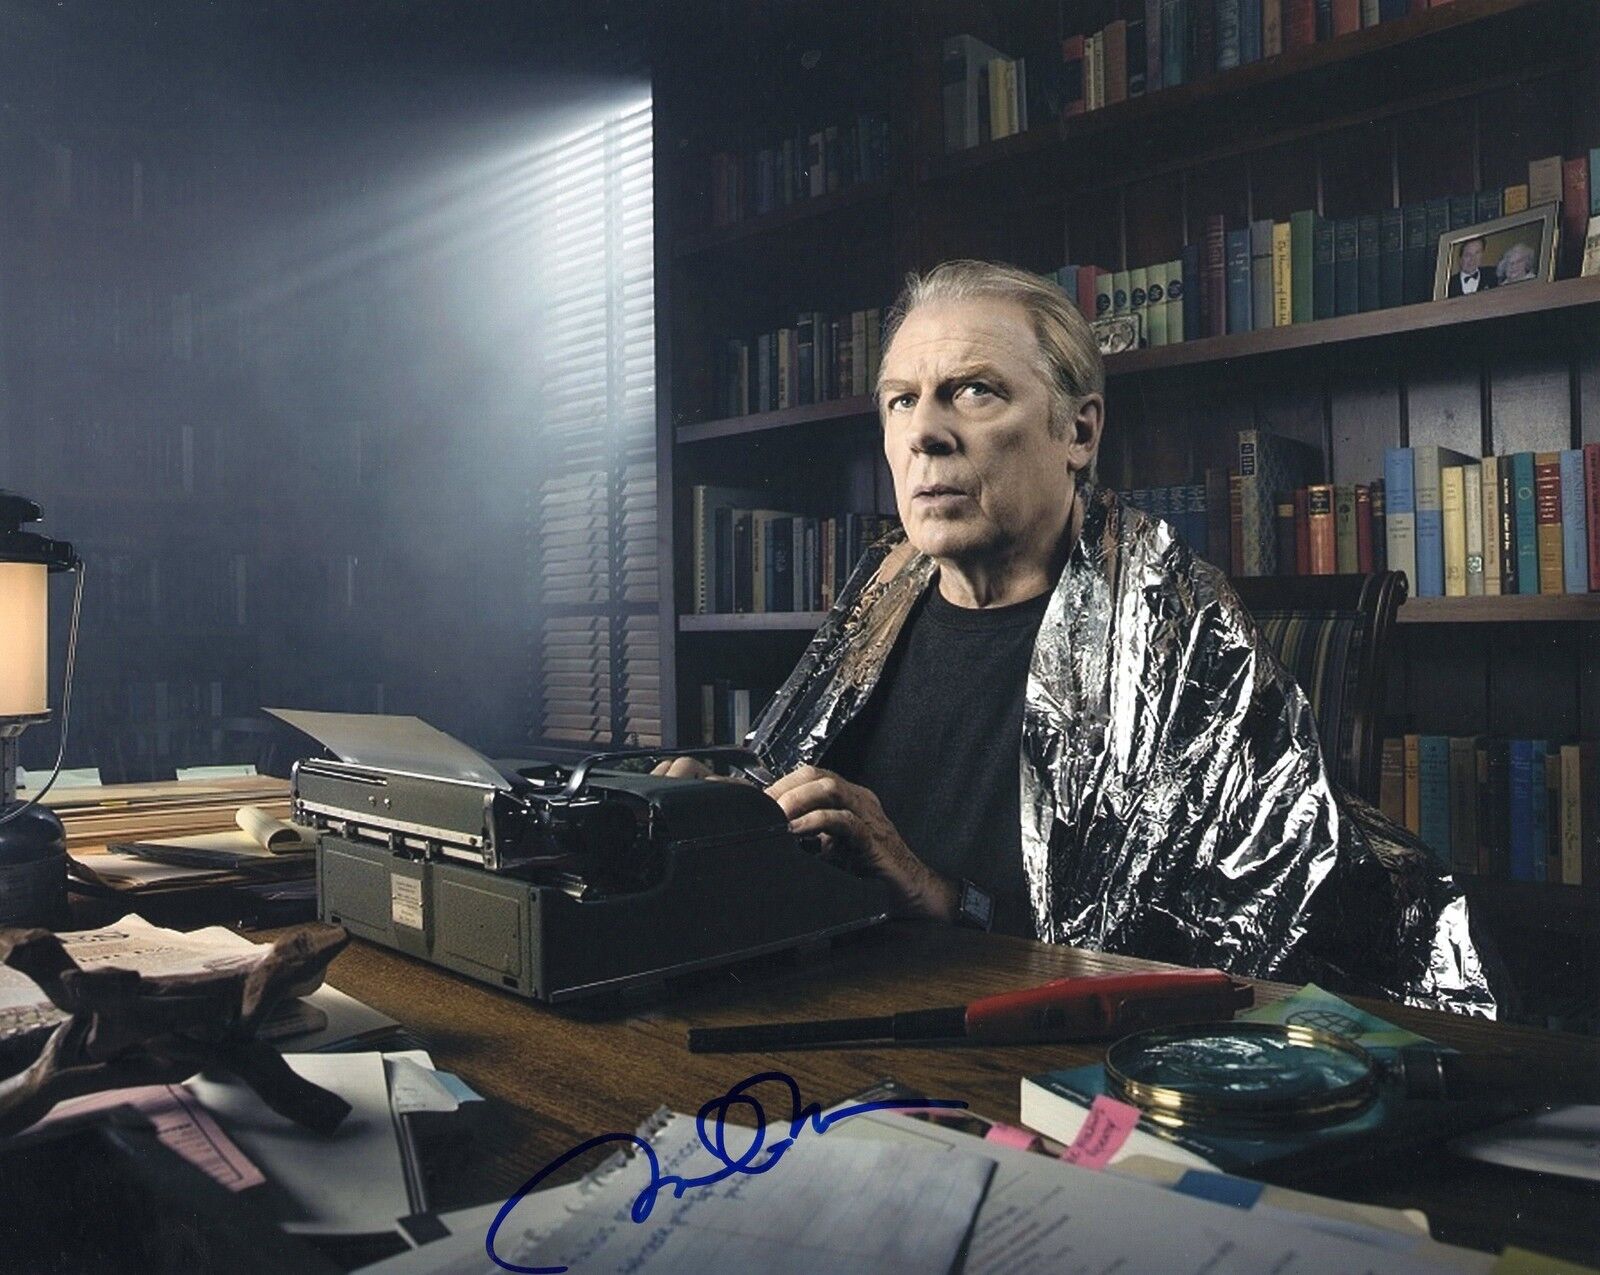 Michael McKean Better Call Saul Chuck McGill Signed 8x10 Photo Poster painting w/COA #2